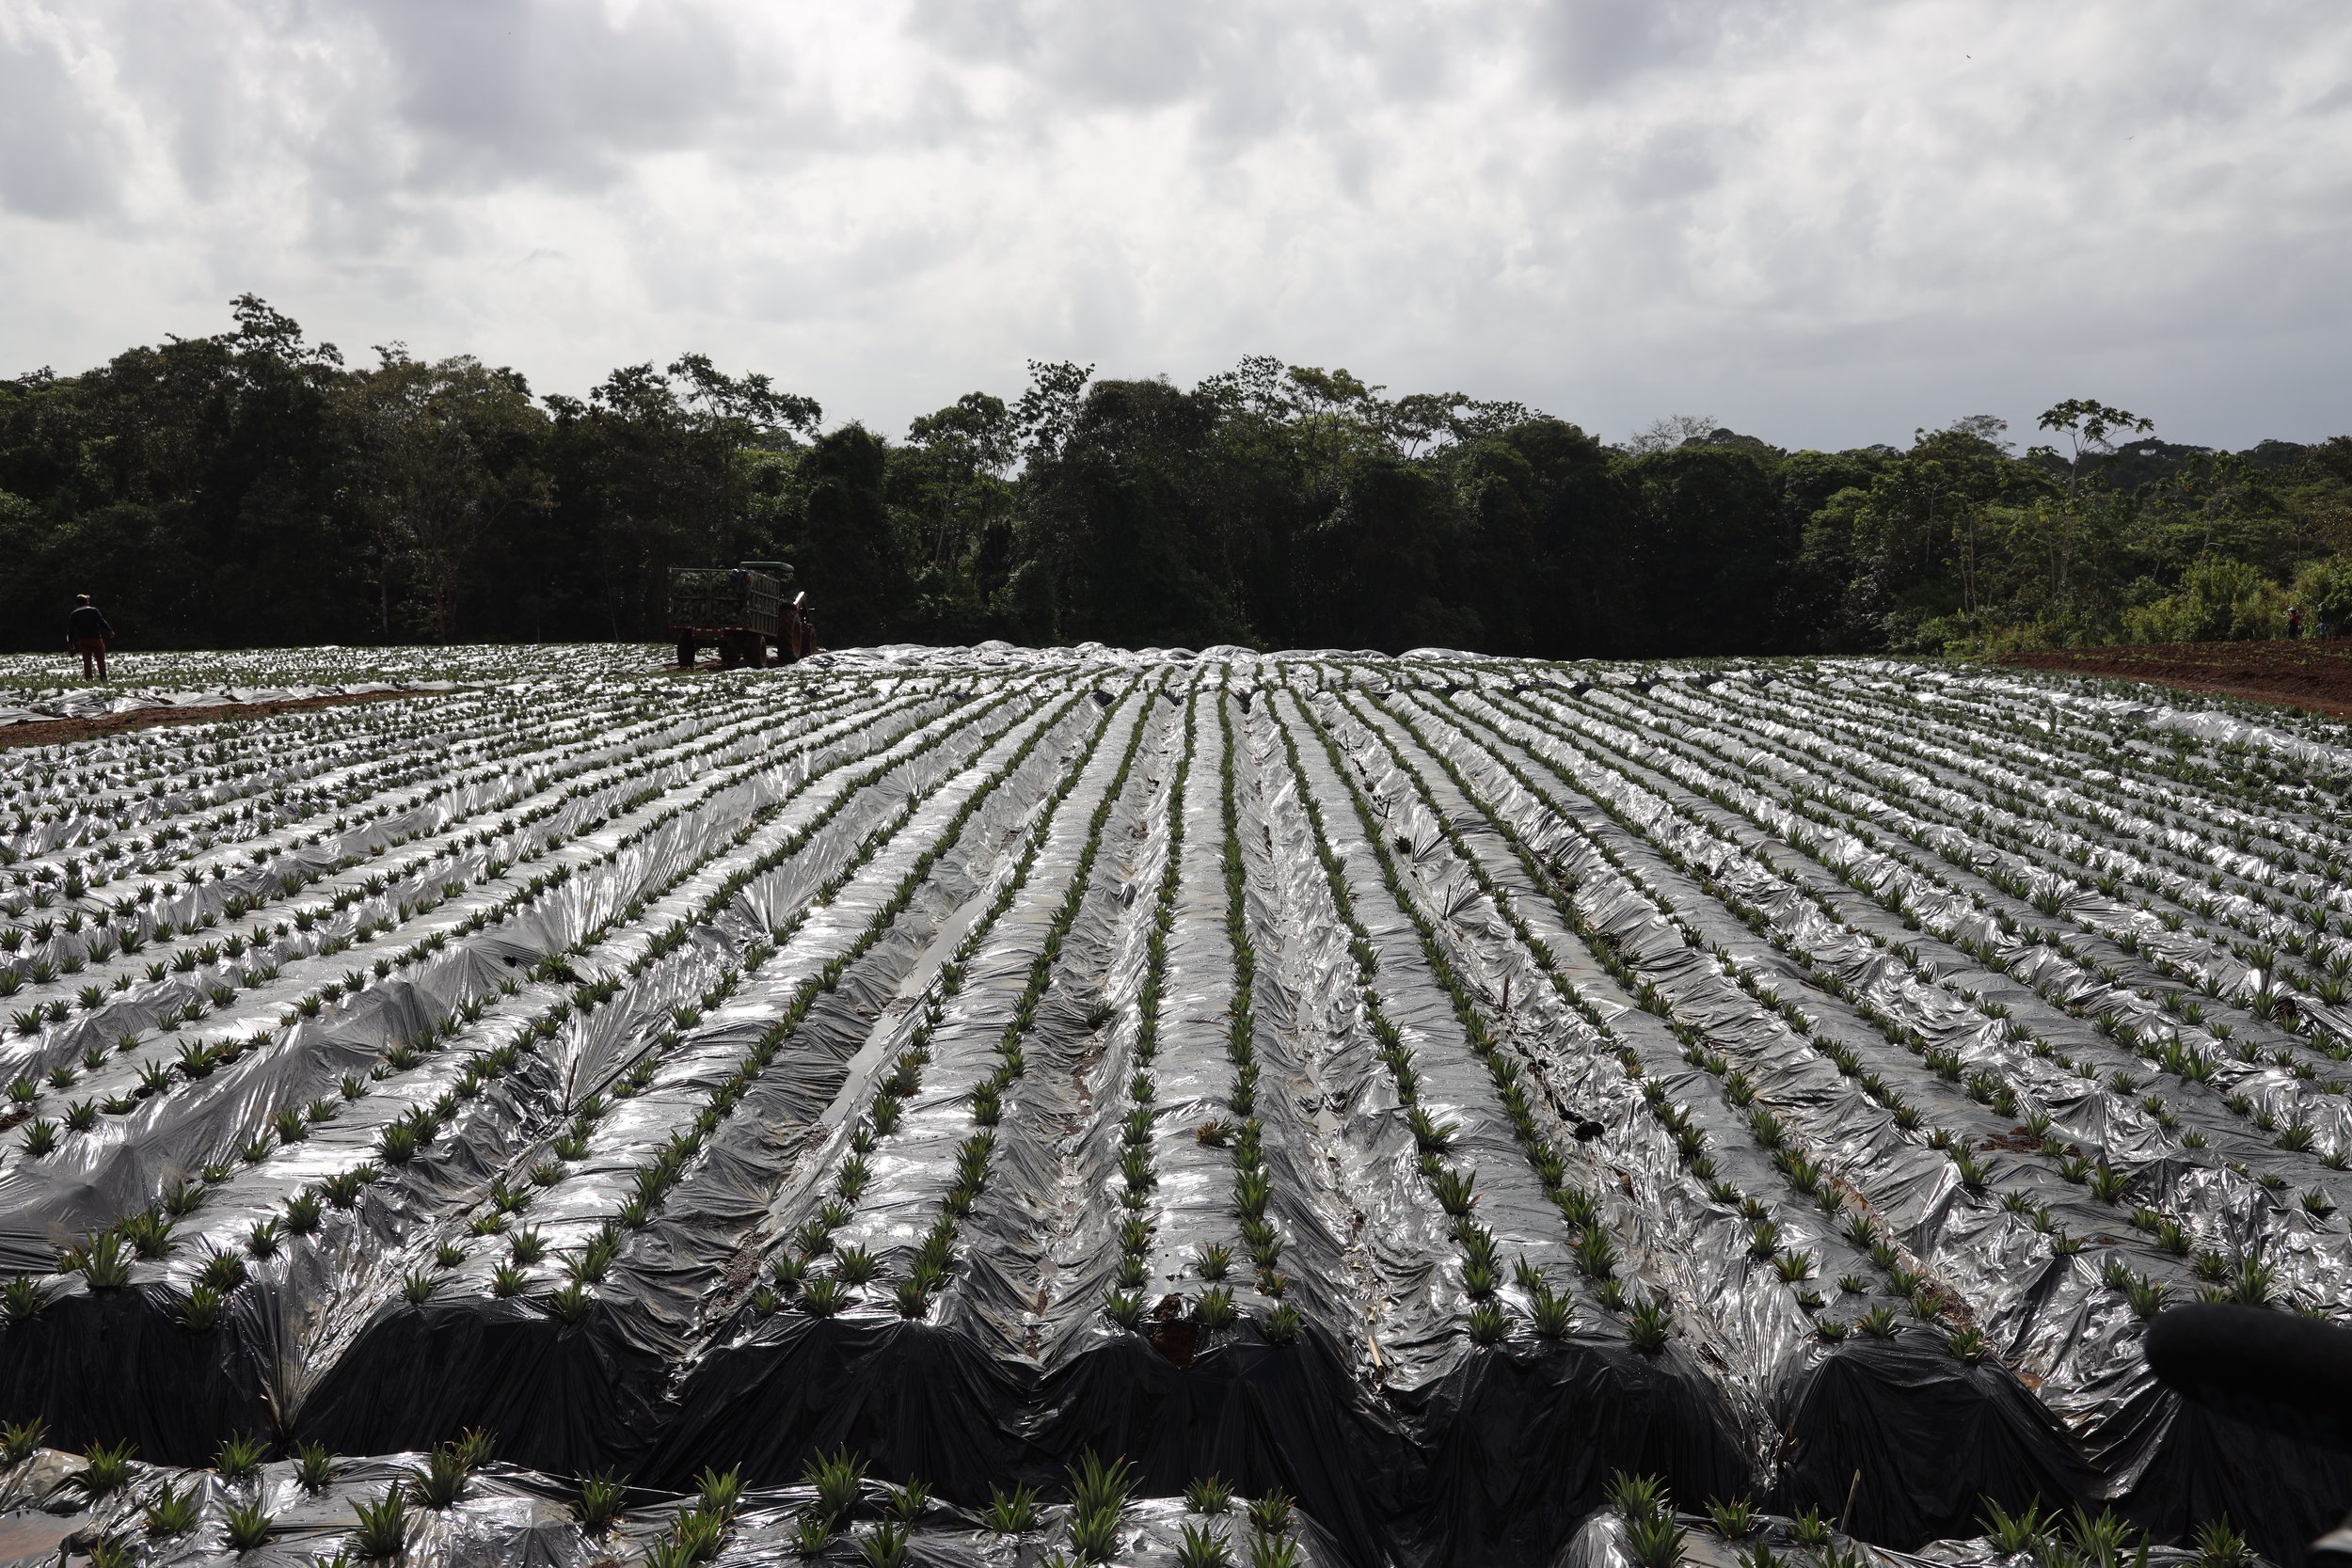  Every planted acre is covered in plastic to help with weed control.&nbsp; The plastic is replaced and recycled every three years.&nbsp; It also traps a lot of moisture and heat, which our guide said pineapples prefer, likening it to a fruit jacuzzi!